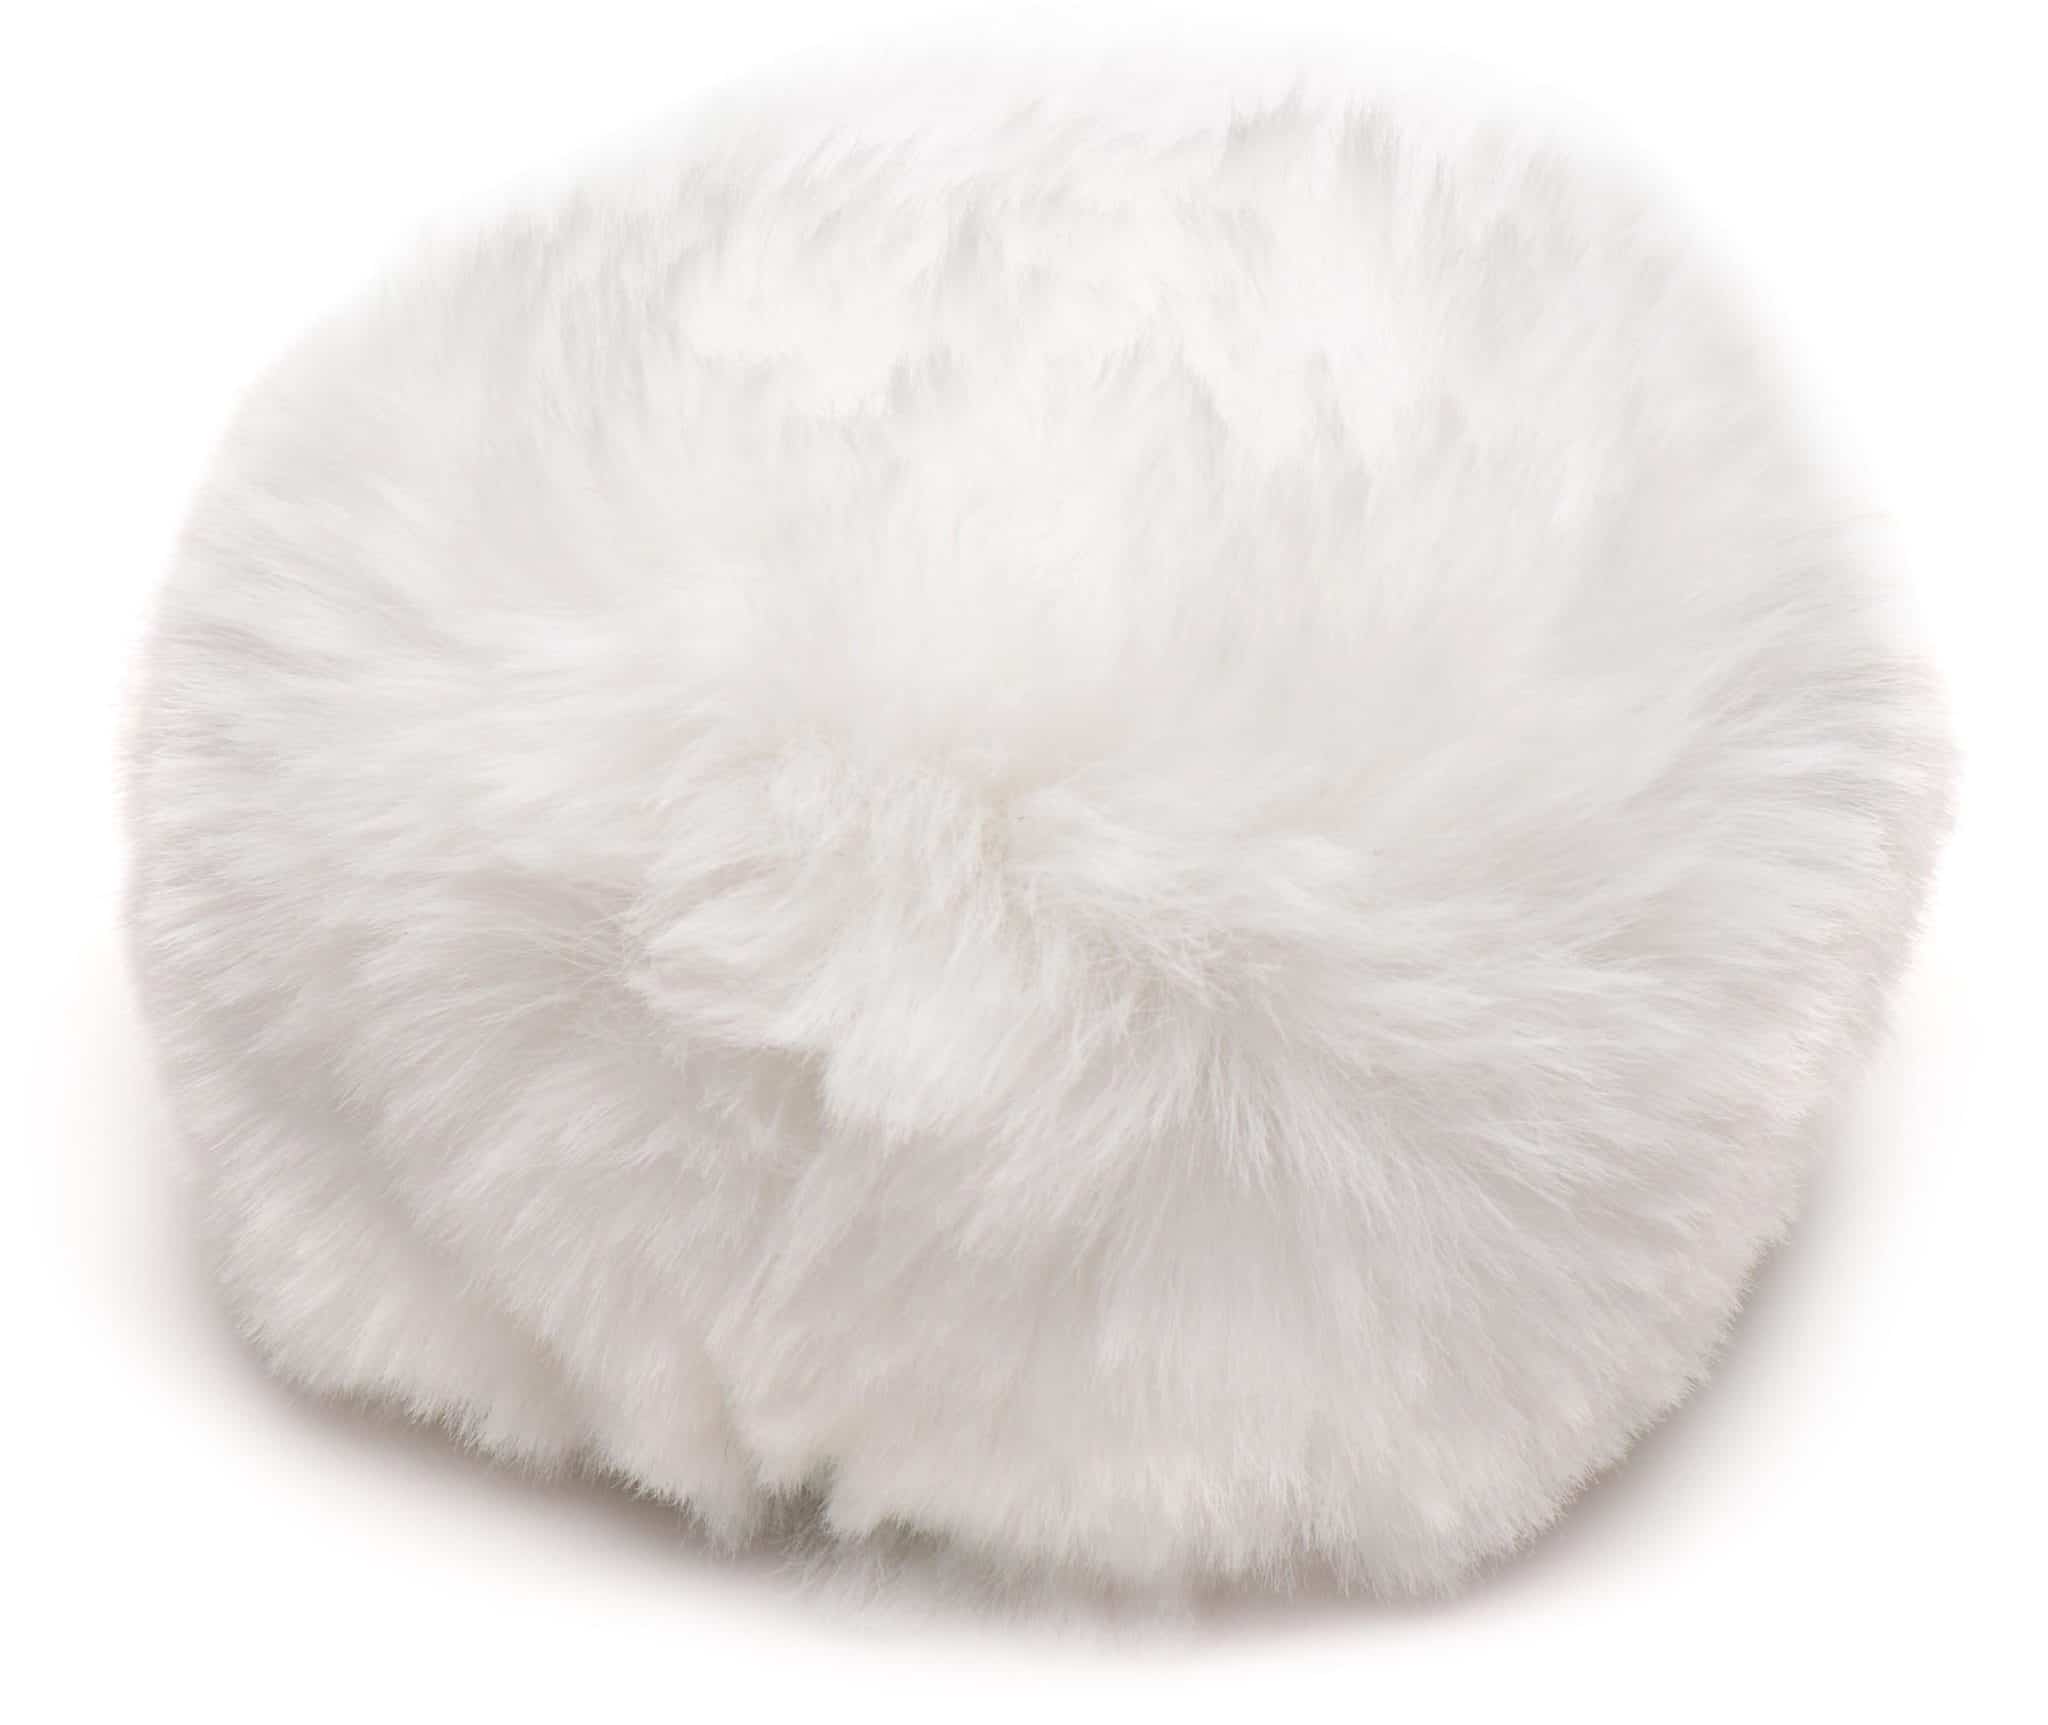 Interchangeable Bunny Tail – White